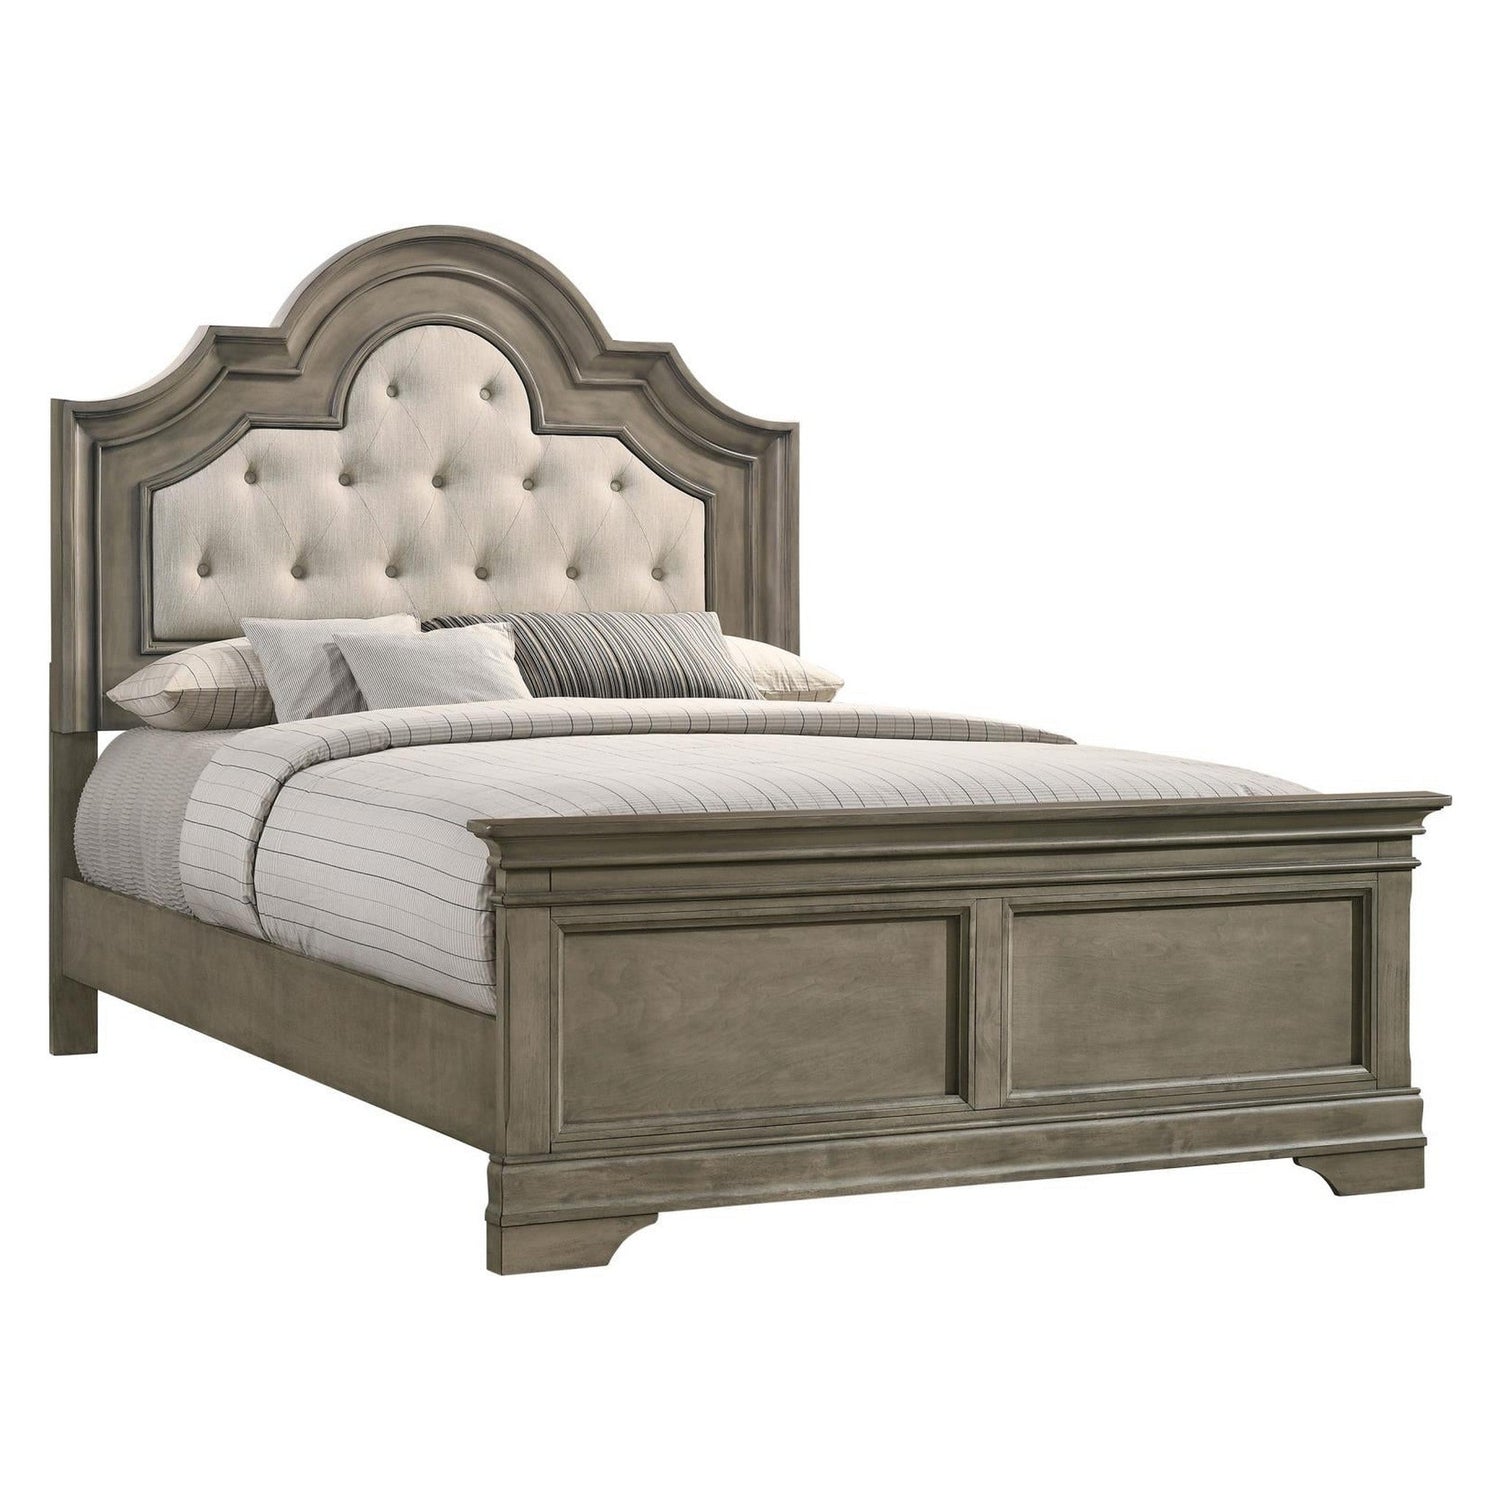 Manchester Bedroom Set with Upholstered Arched Headboard Wheat 222891KW-S4